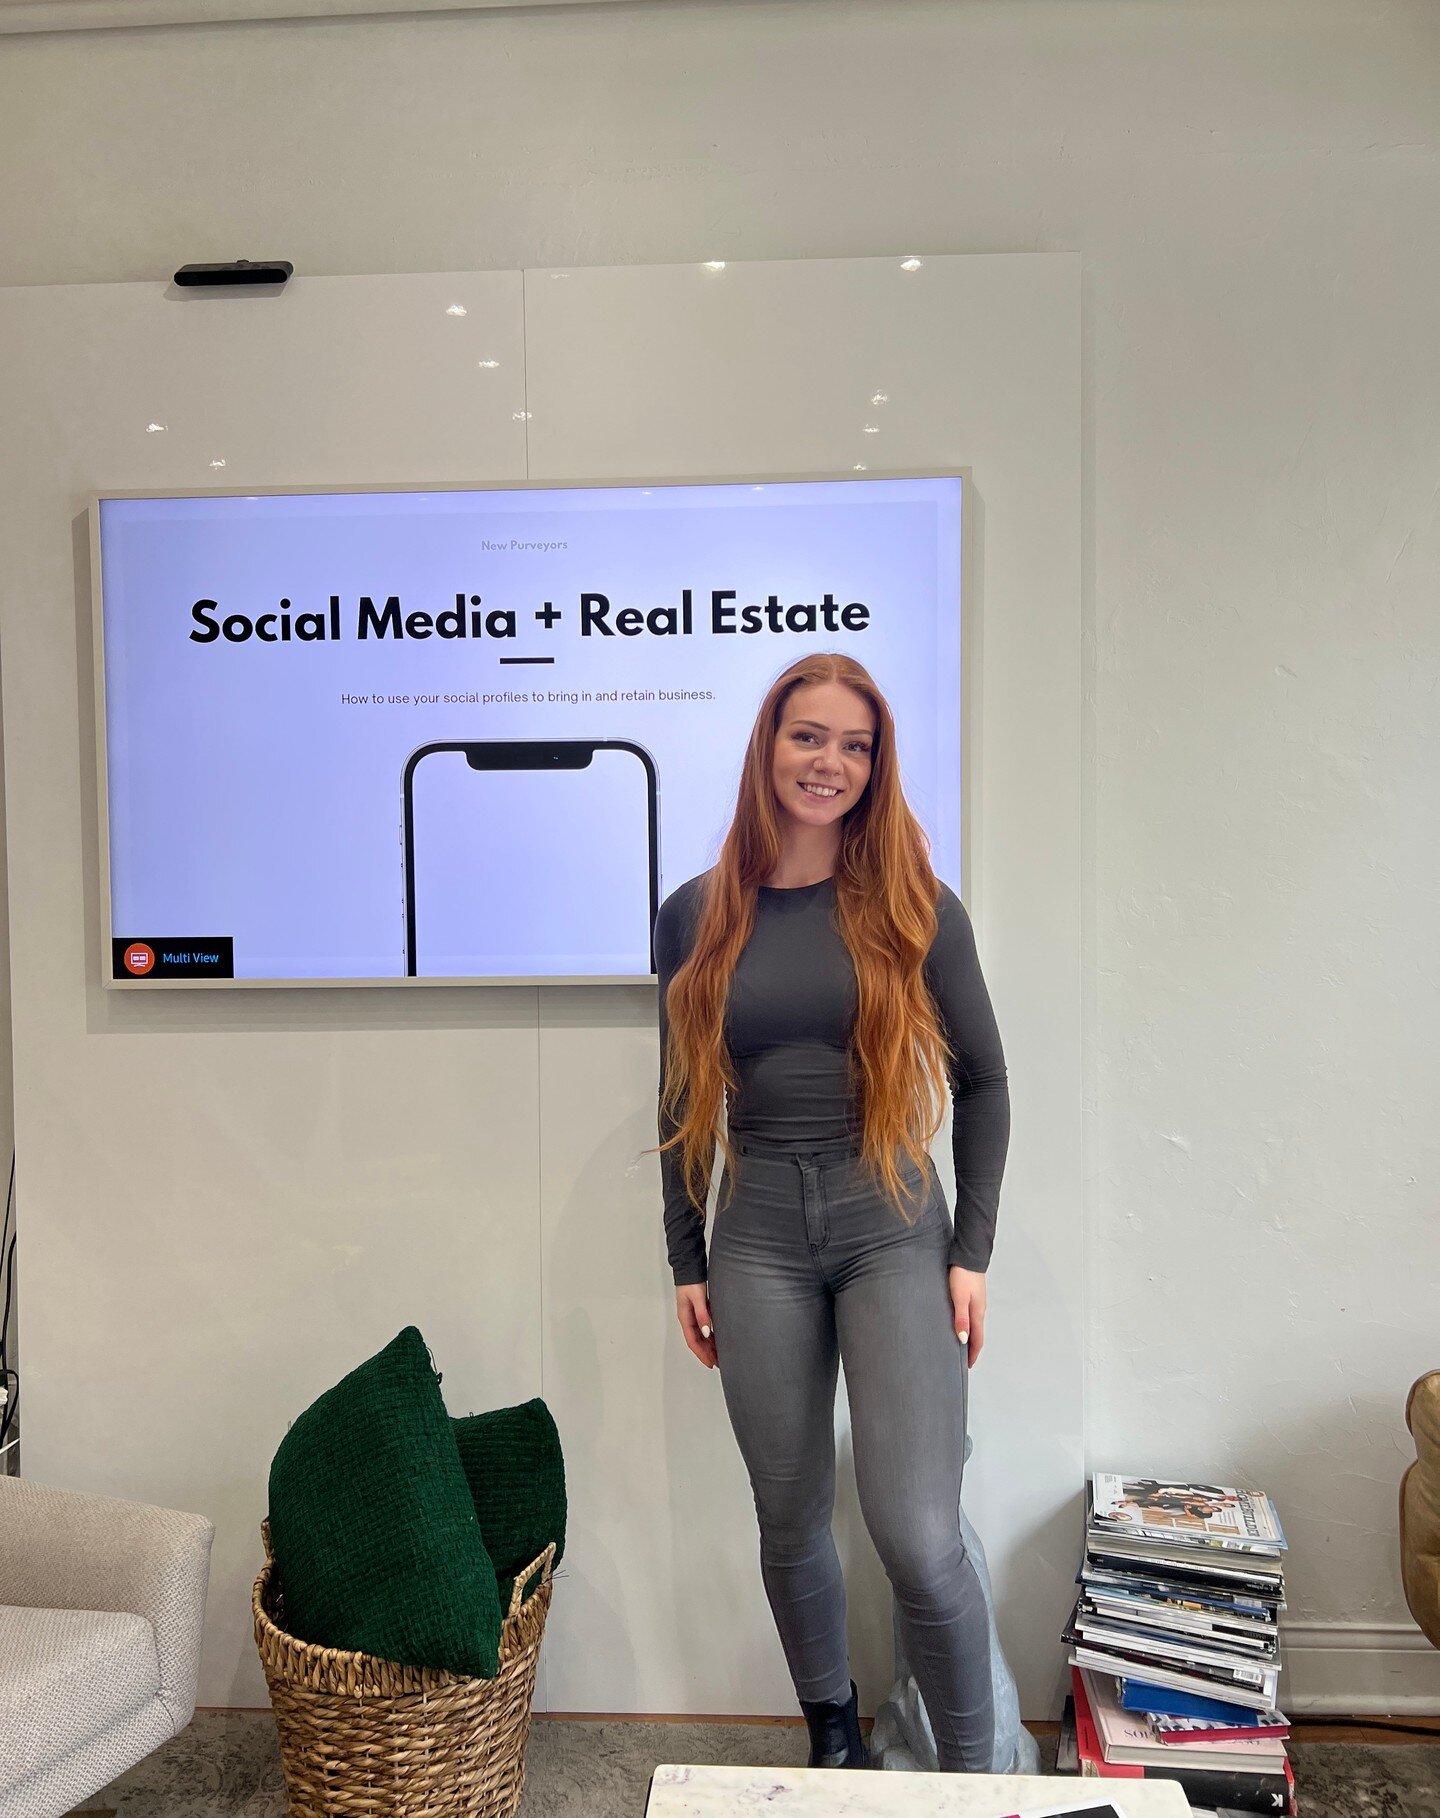 Today, we had a valuable session listening to @lxwren discuss social media and its impact on real estate.

In today's digital era, the reach and visibility on social media play a crucial role in the success of real estate agents and their listings. B